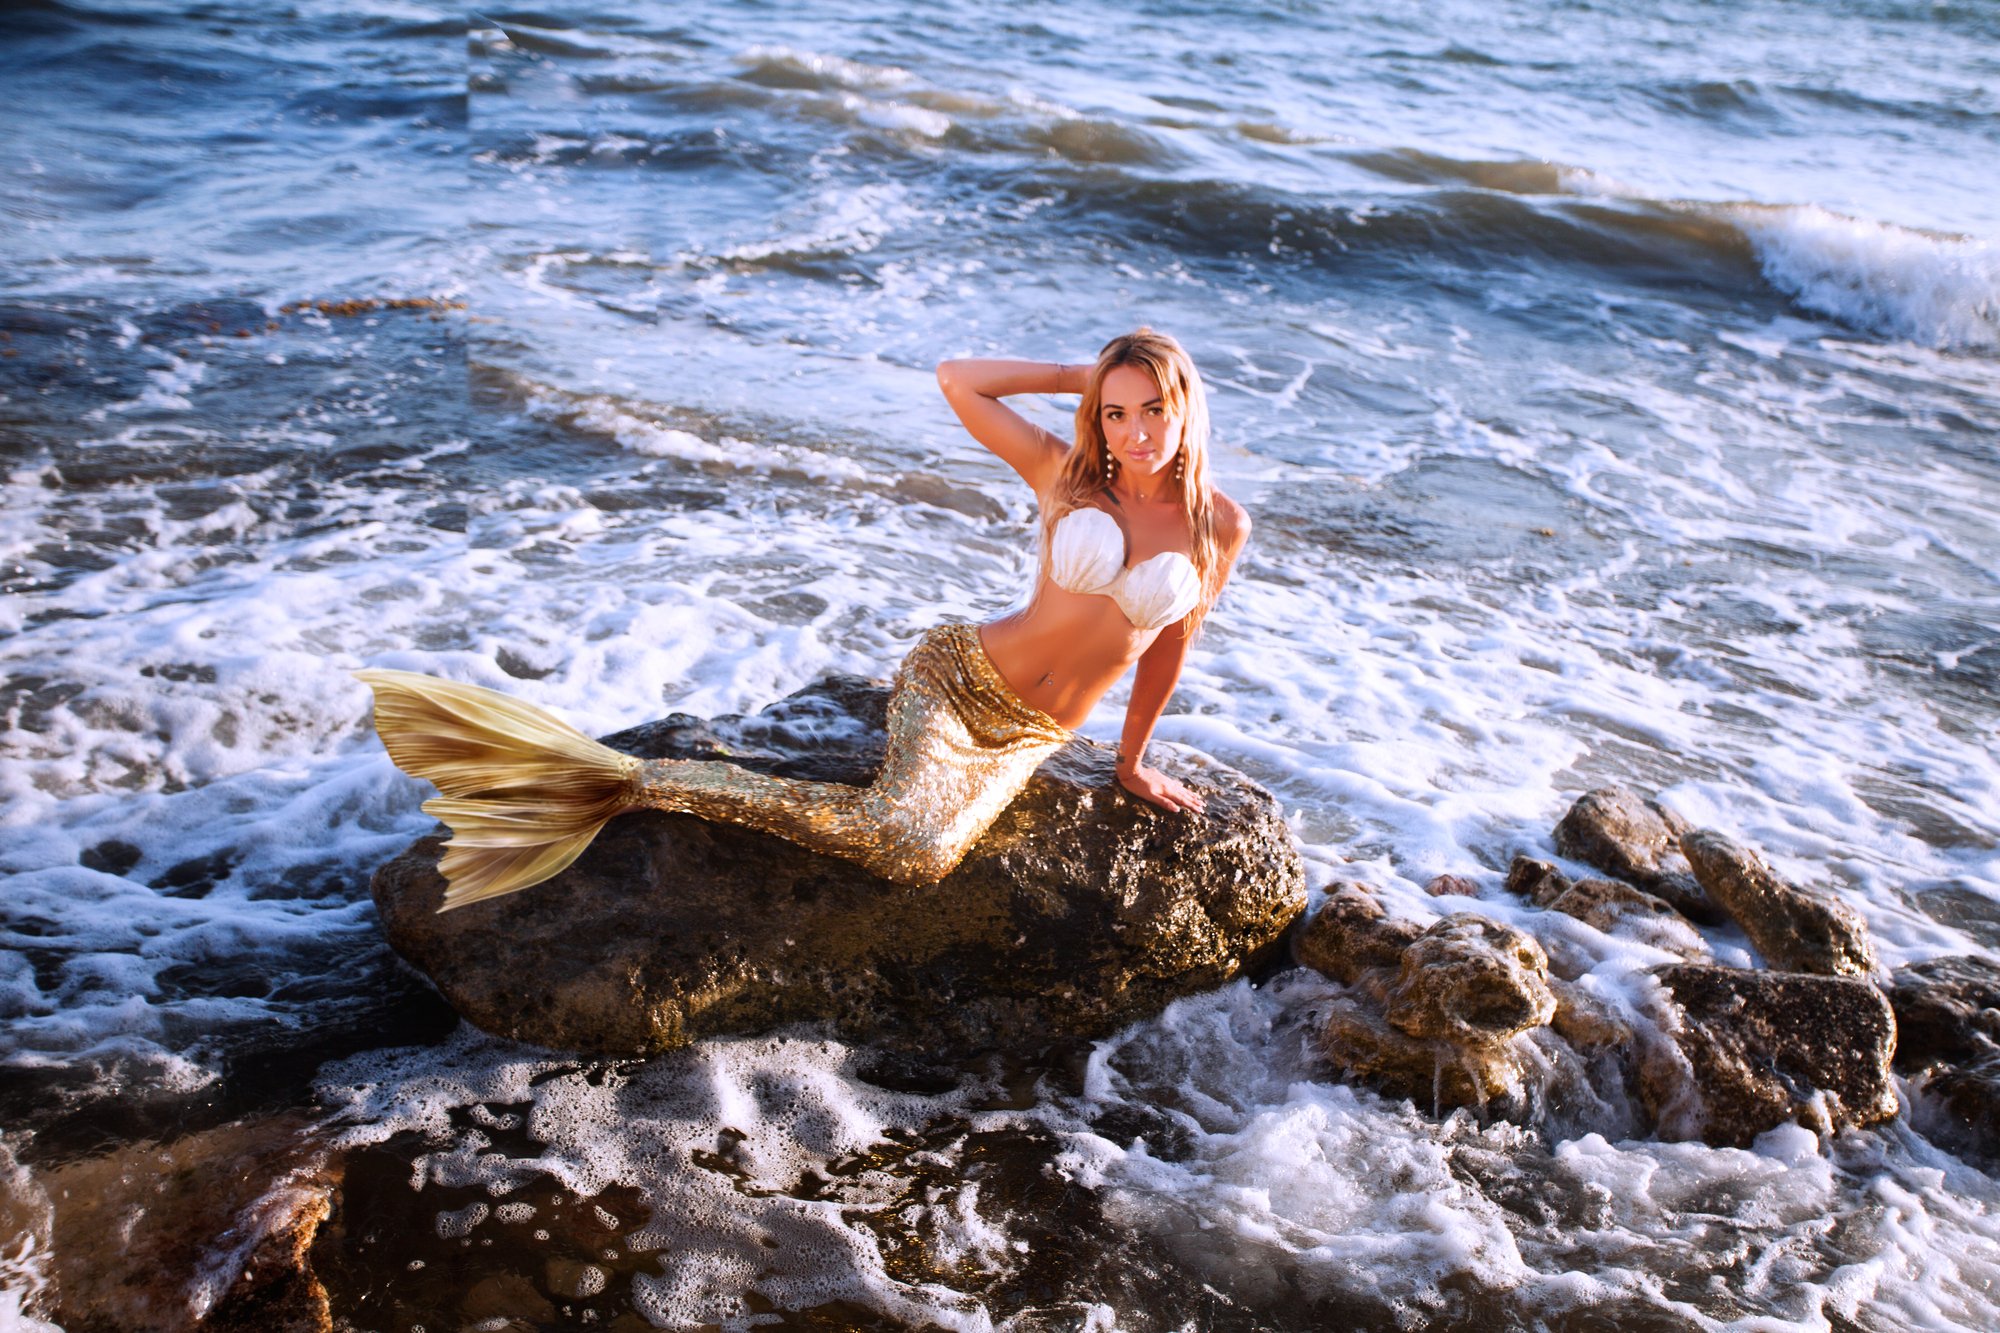 beautiful mermaid with golden tail sits on the seashore